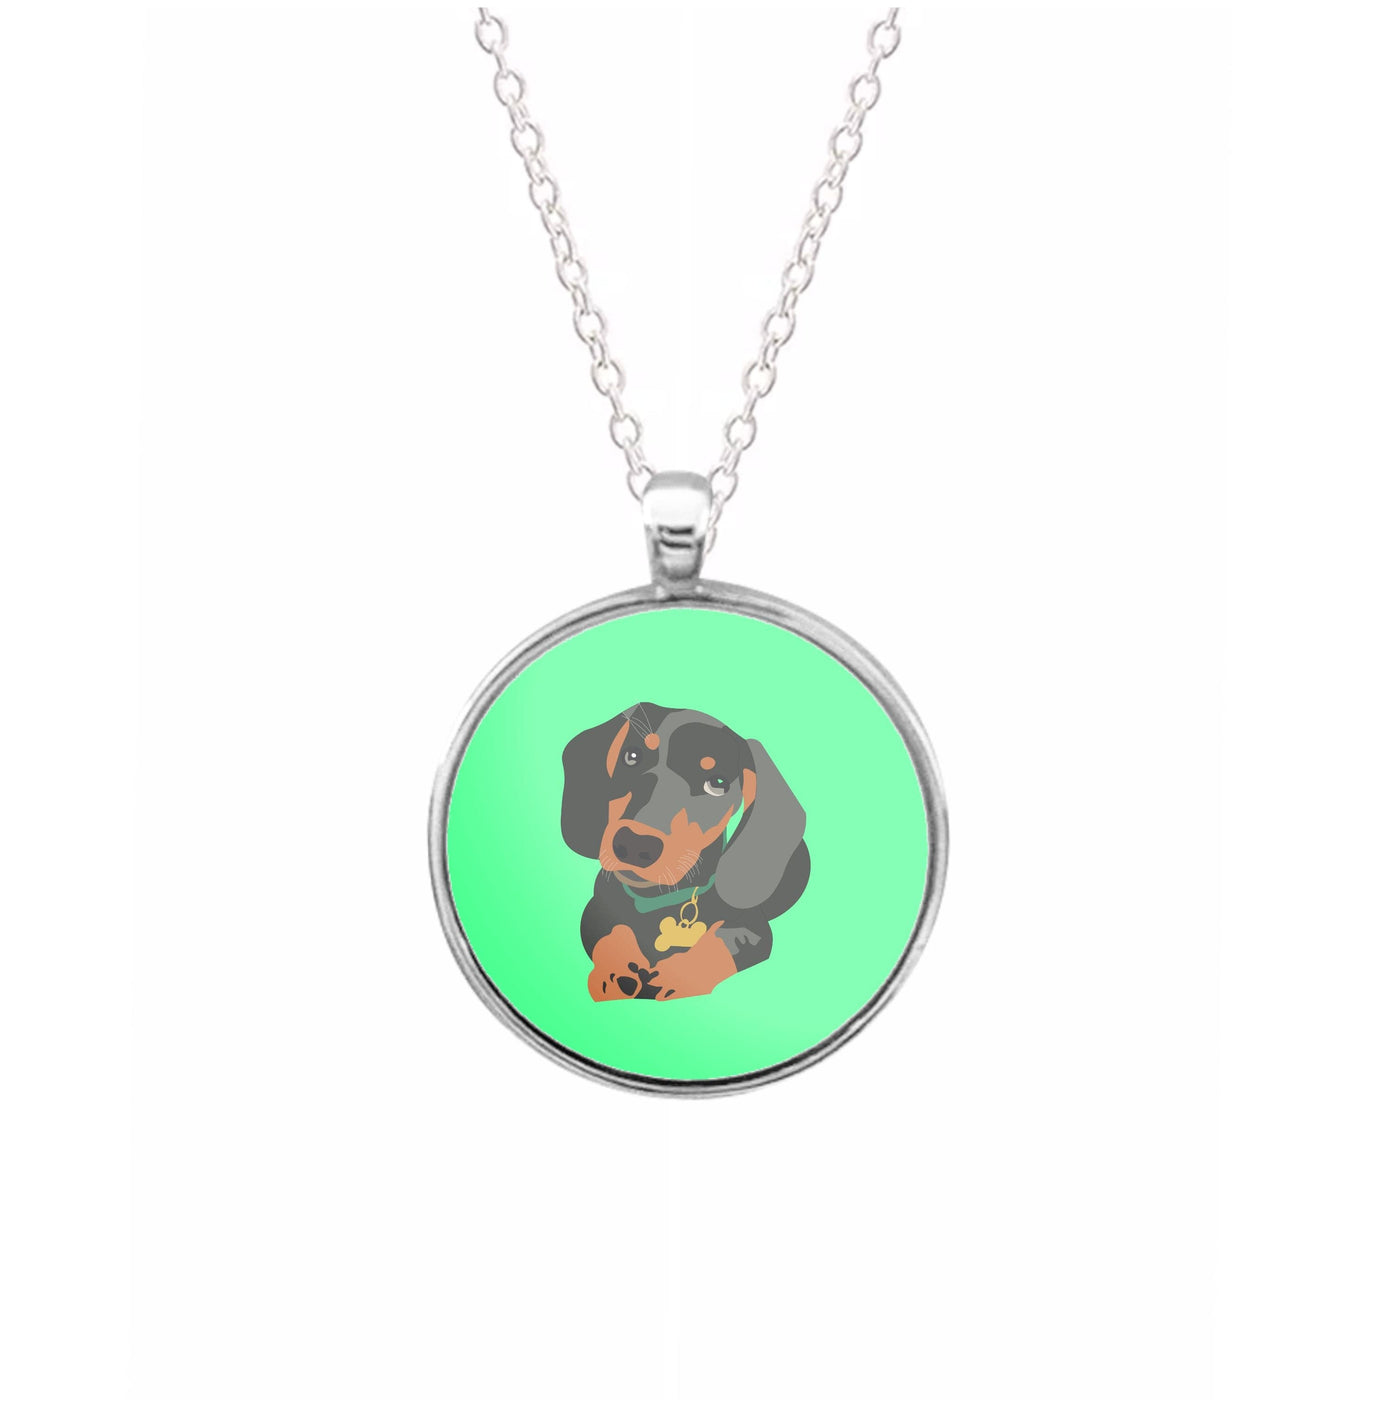 Black & brown - Dachshunds Necklace